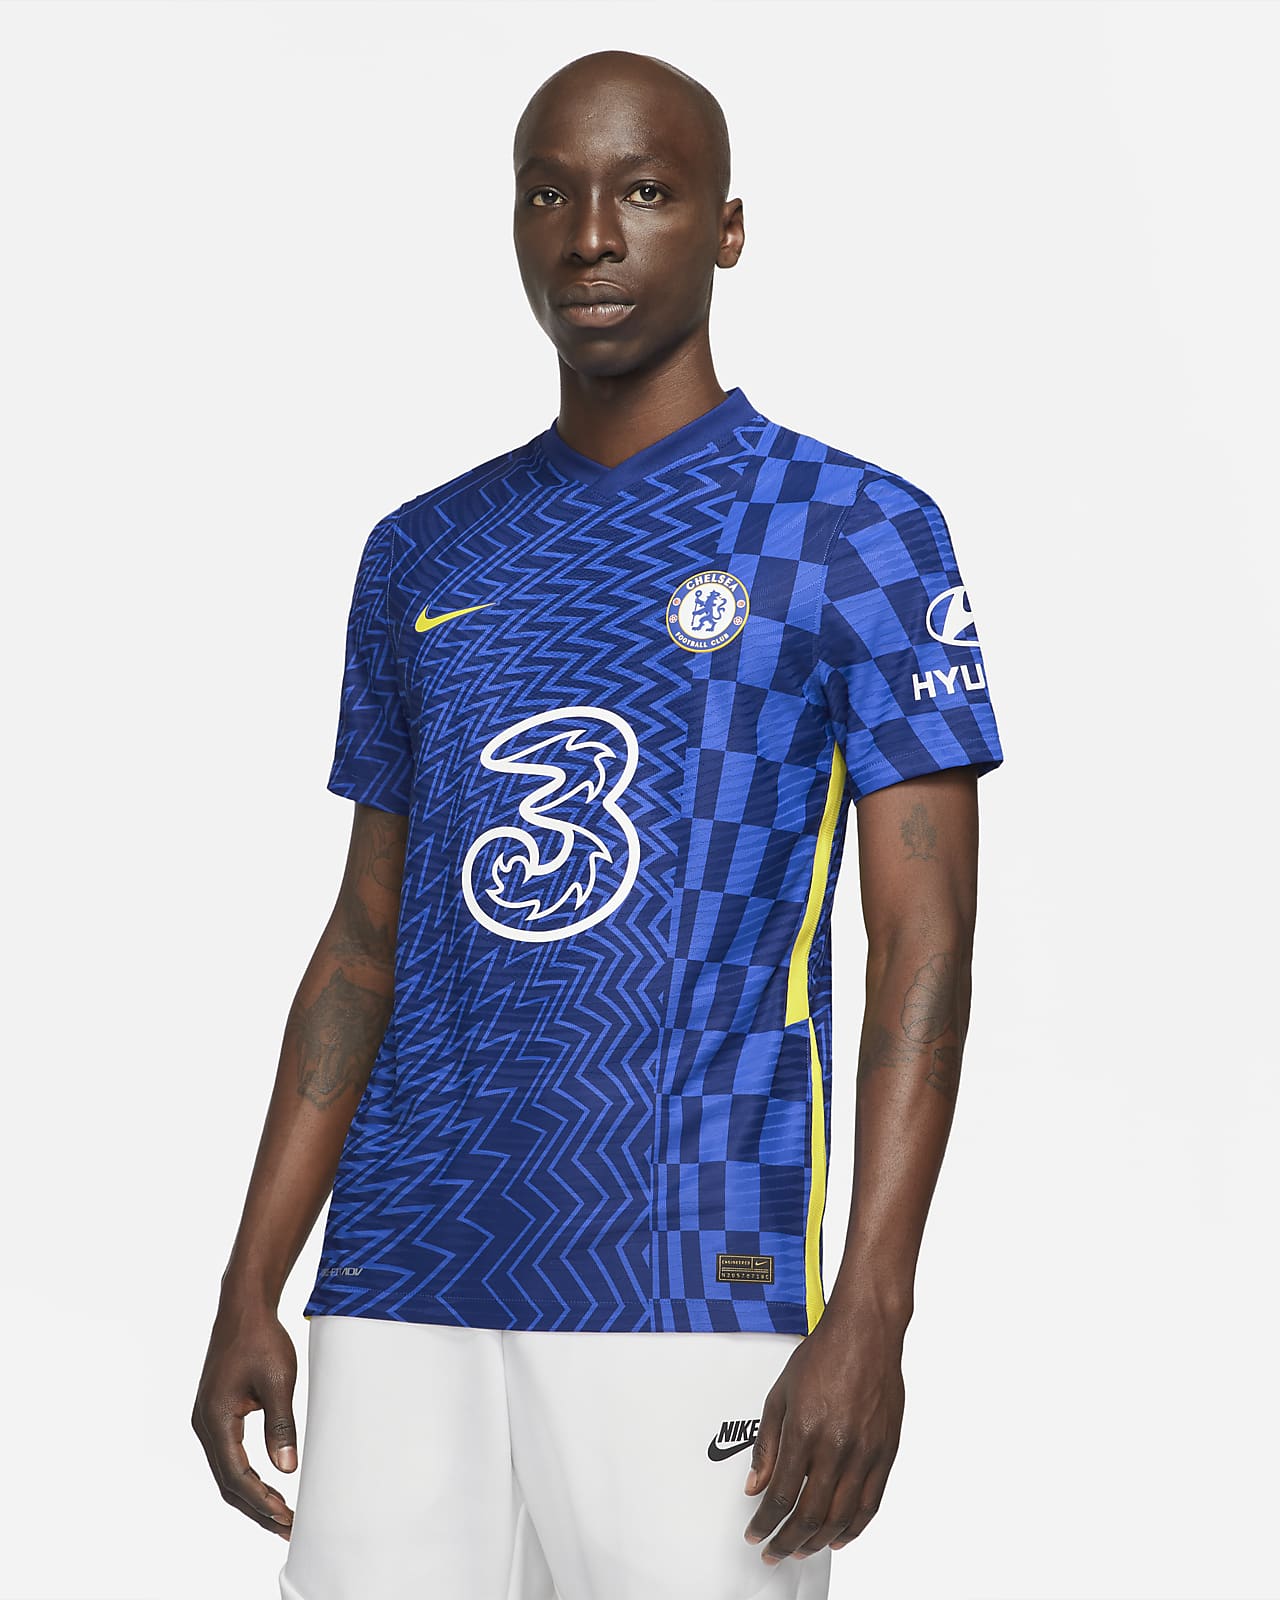 Chelsea F.c. Kit - Chelsea Fc Store Official Chelsea Fc Clothing ...